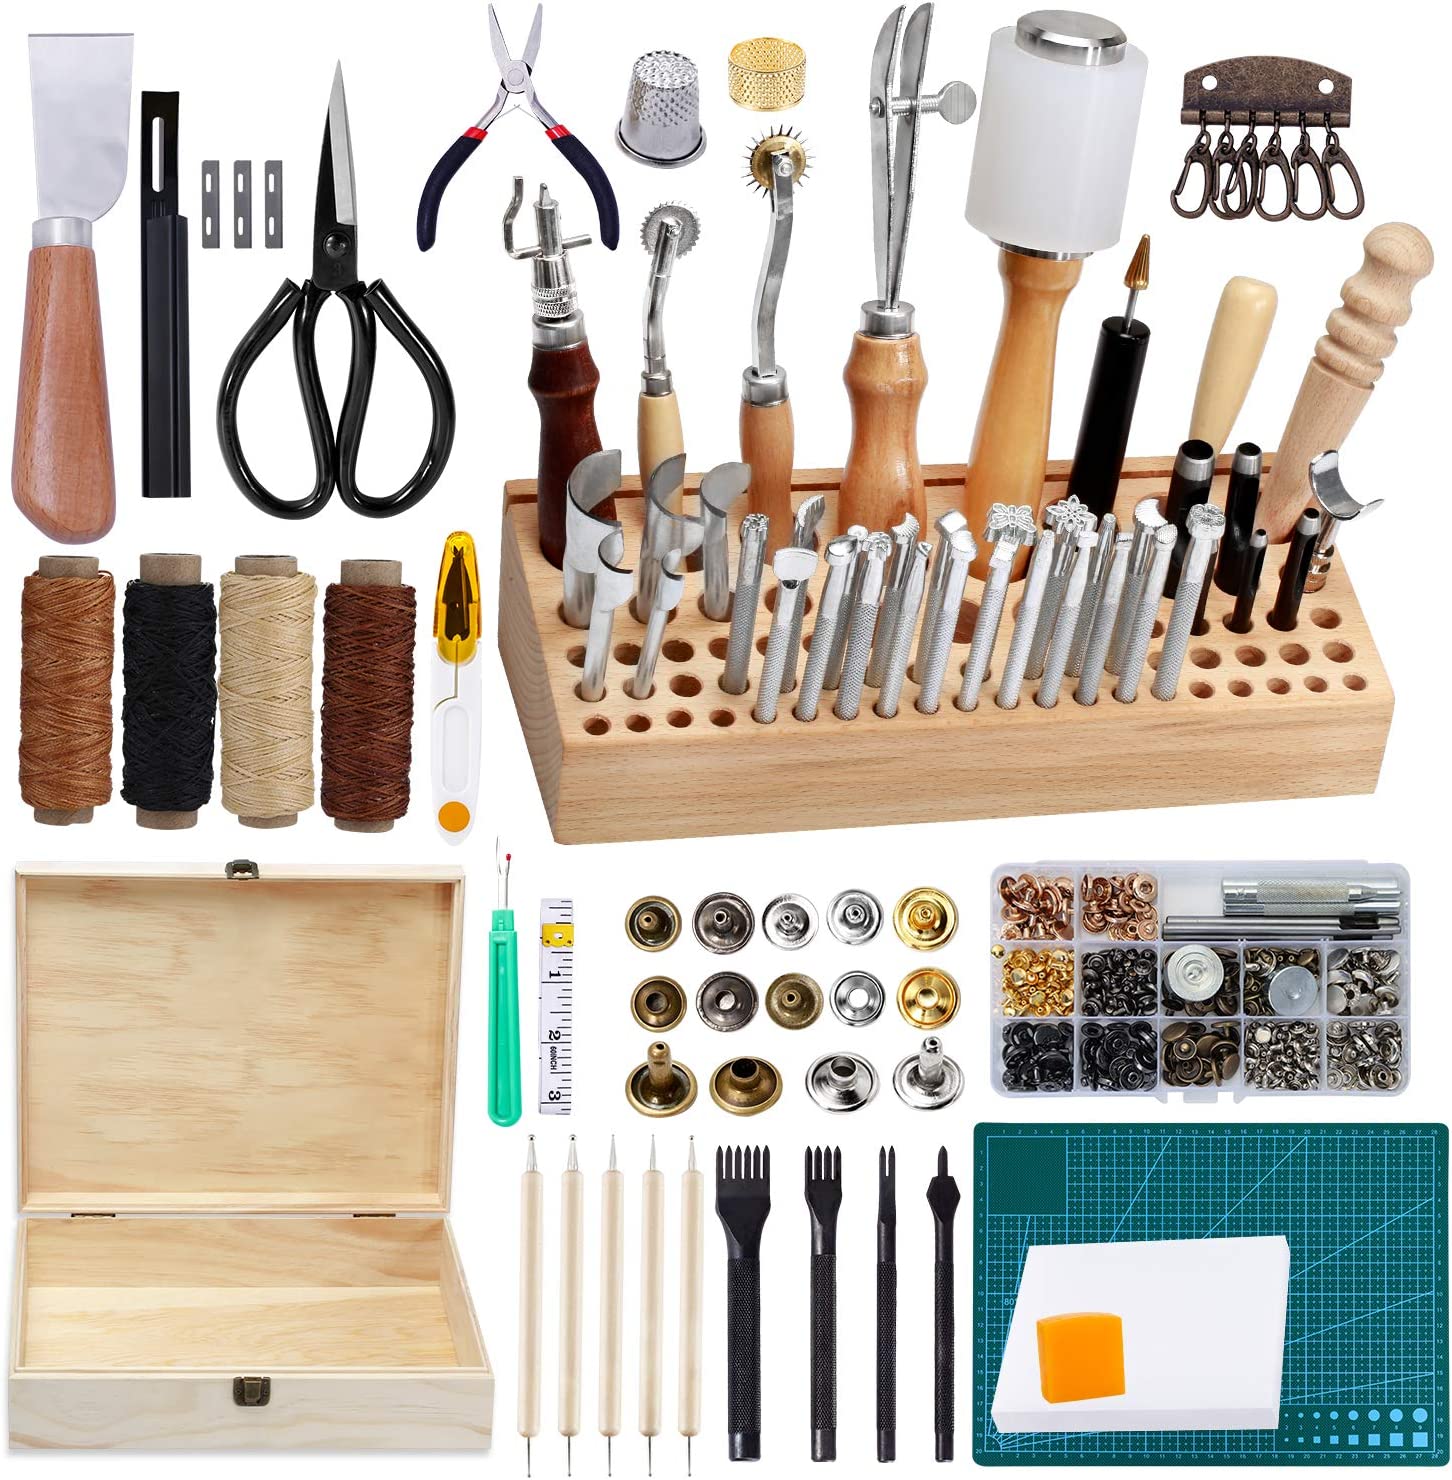 BUTUZE 489Pcs Leather Working Tools Kit with Instructions,Leather Sewing  Tools Kit Leather Working Supplies with Leather Craft Stamping Tools,Gift  for